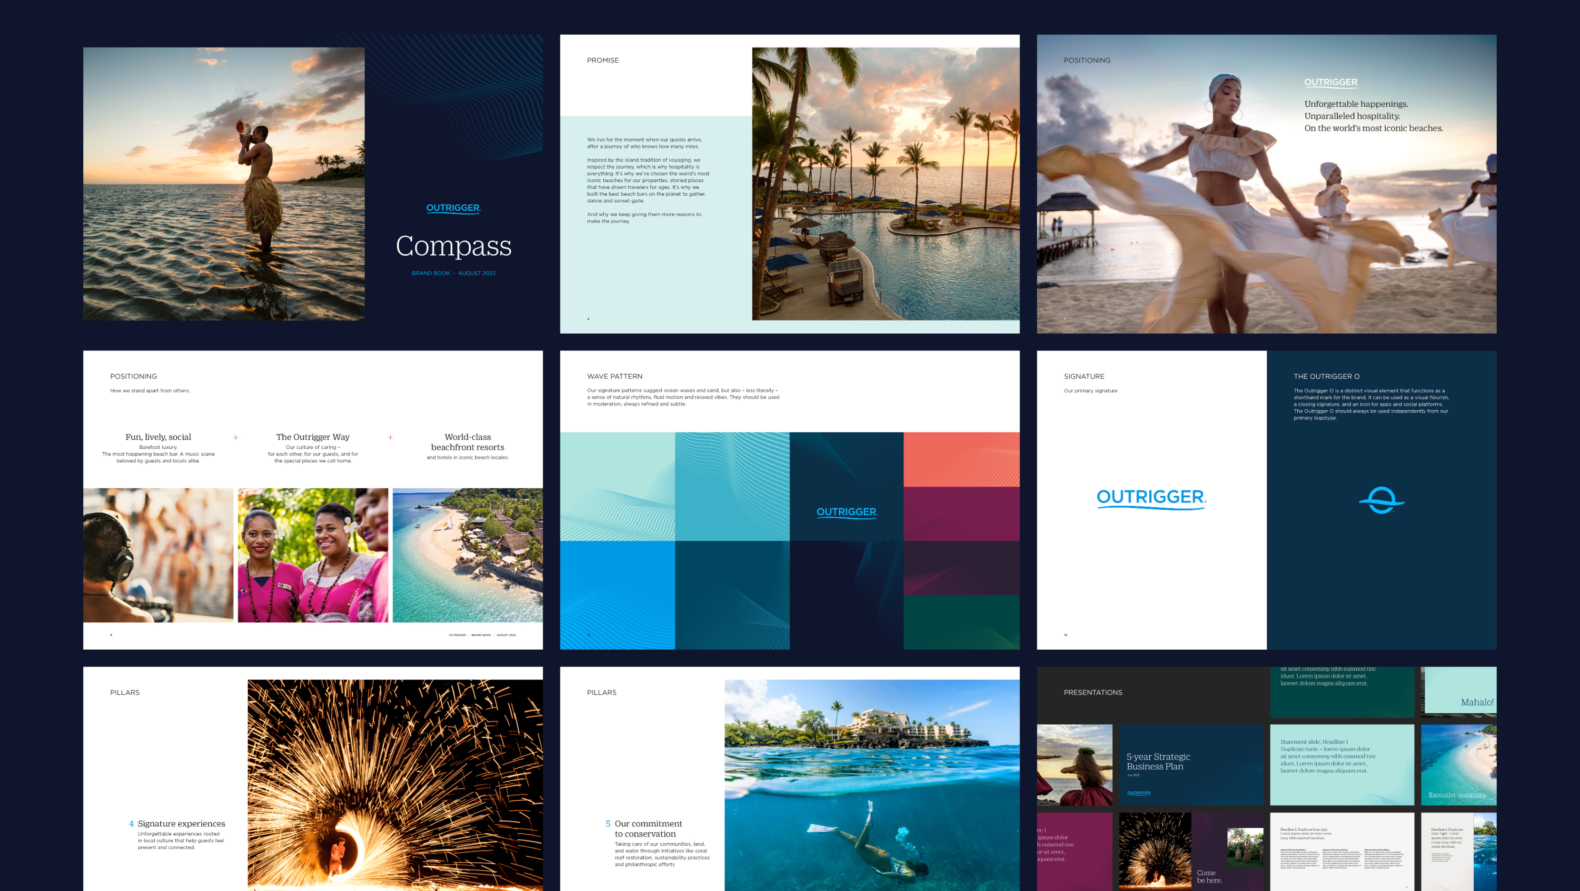 Various layouts for the Outrigger sales deck are shown, featuring a Hawaiian blowing a conch shell in the shallow ocean, a photo of a resort pool framed by palm trees, a photo of three women dancing and twirling their skirts on the beach, plus various imagery of the brand colors, logos and layouts. All colors are varied blues, white and purple.